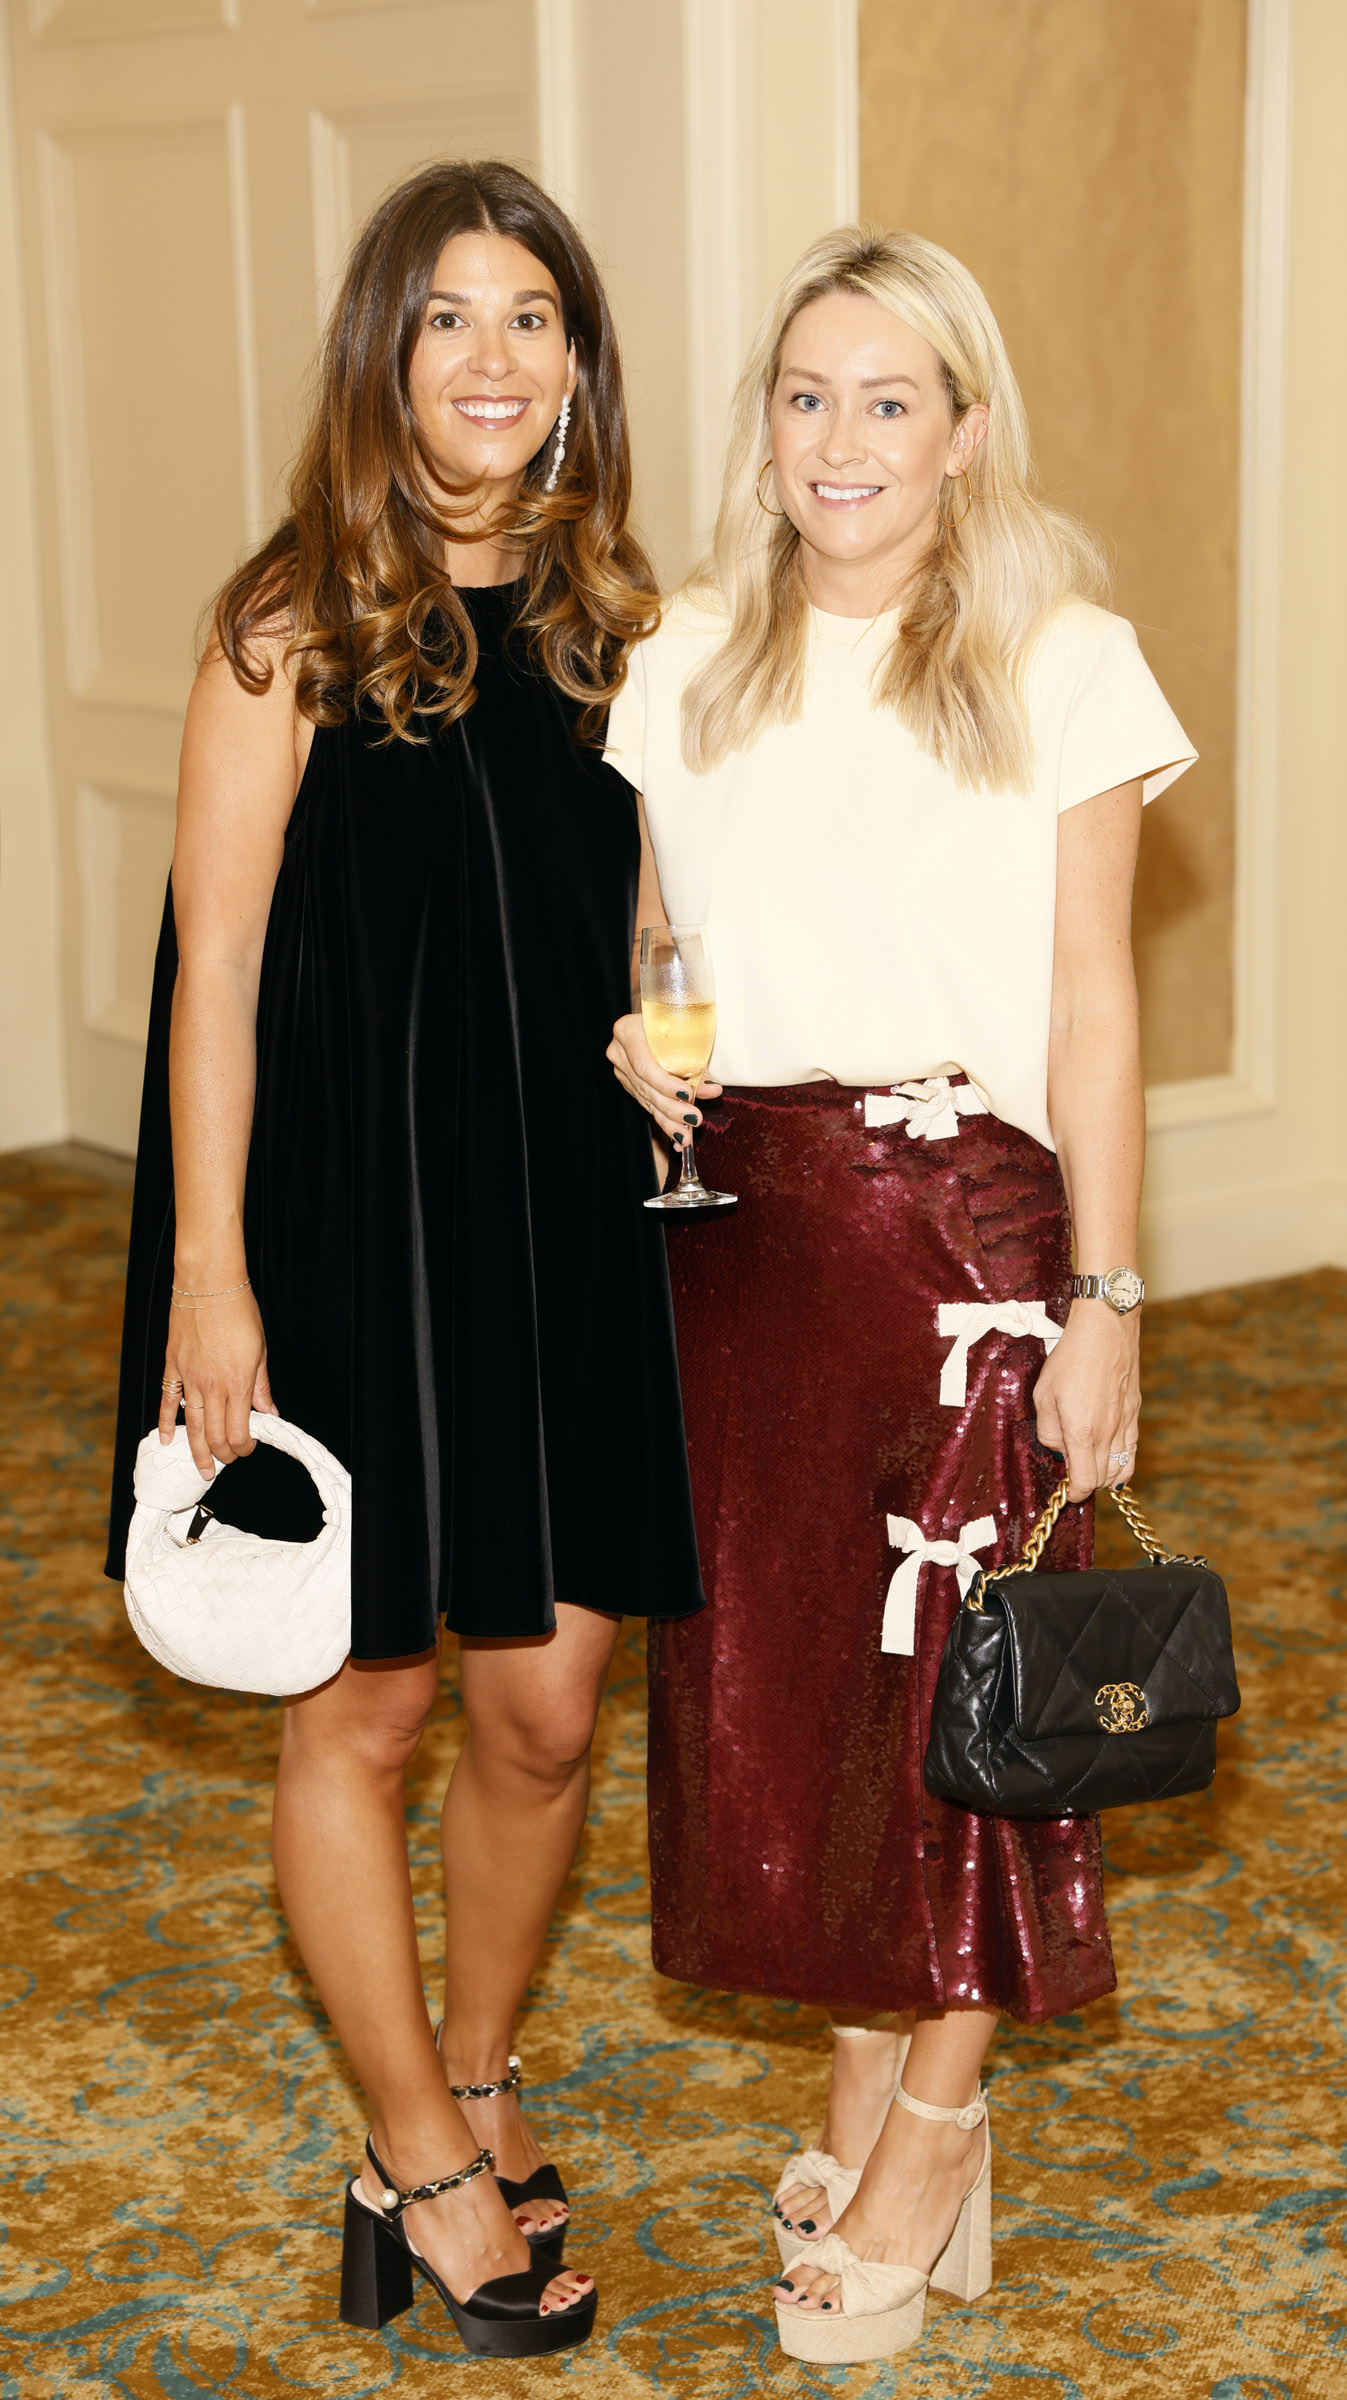 Brittany Bennett and Rachel Armstrong - Pic by Kieran Harnett, ISPCC Brown Thomas Lunch